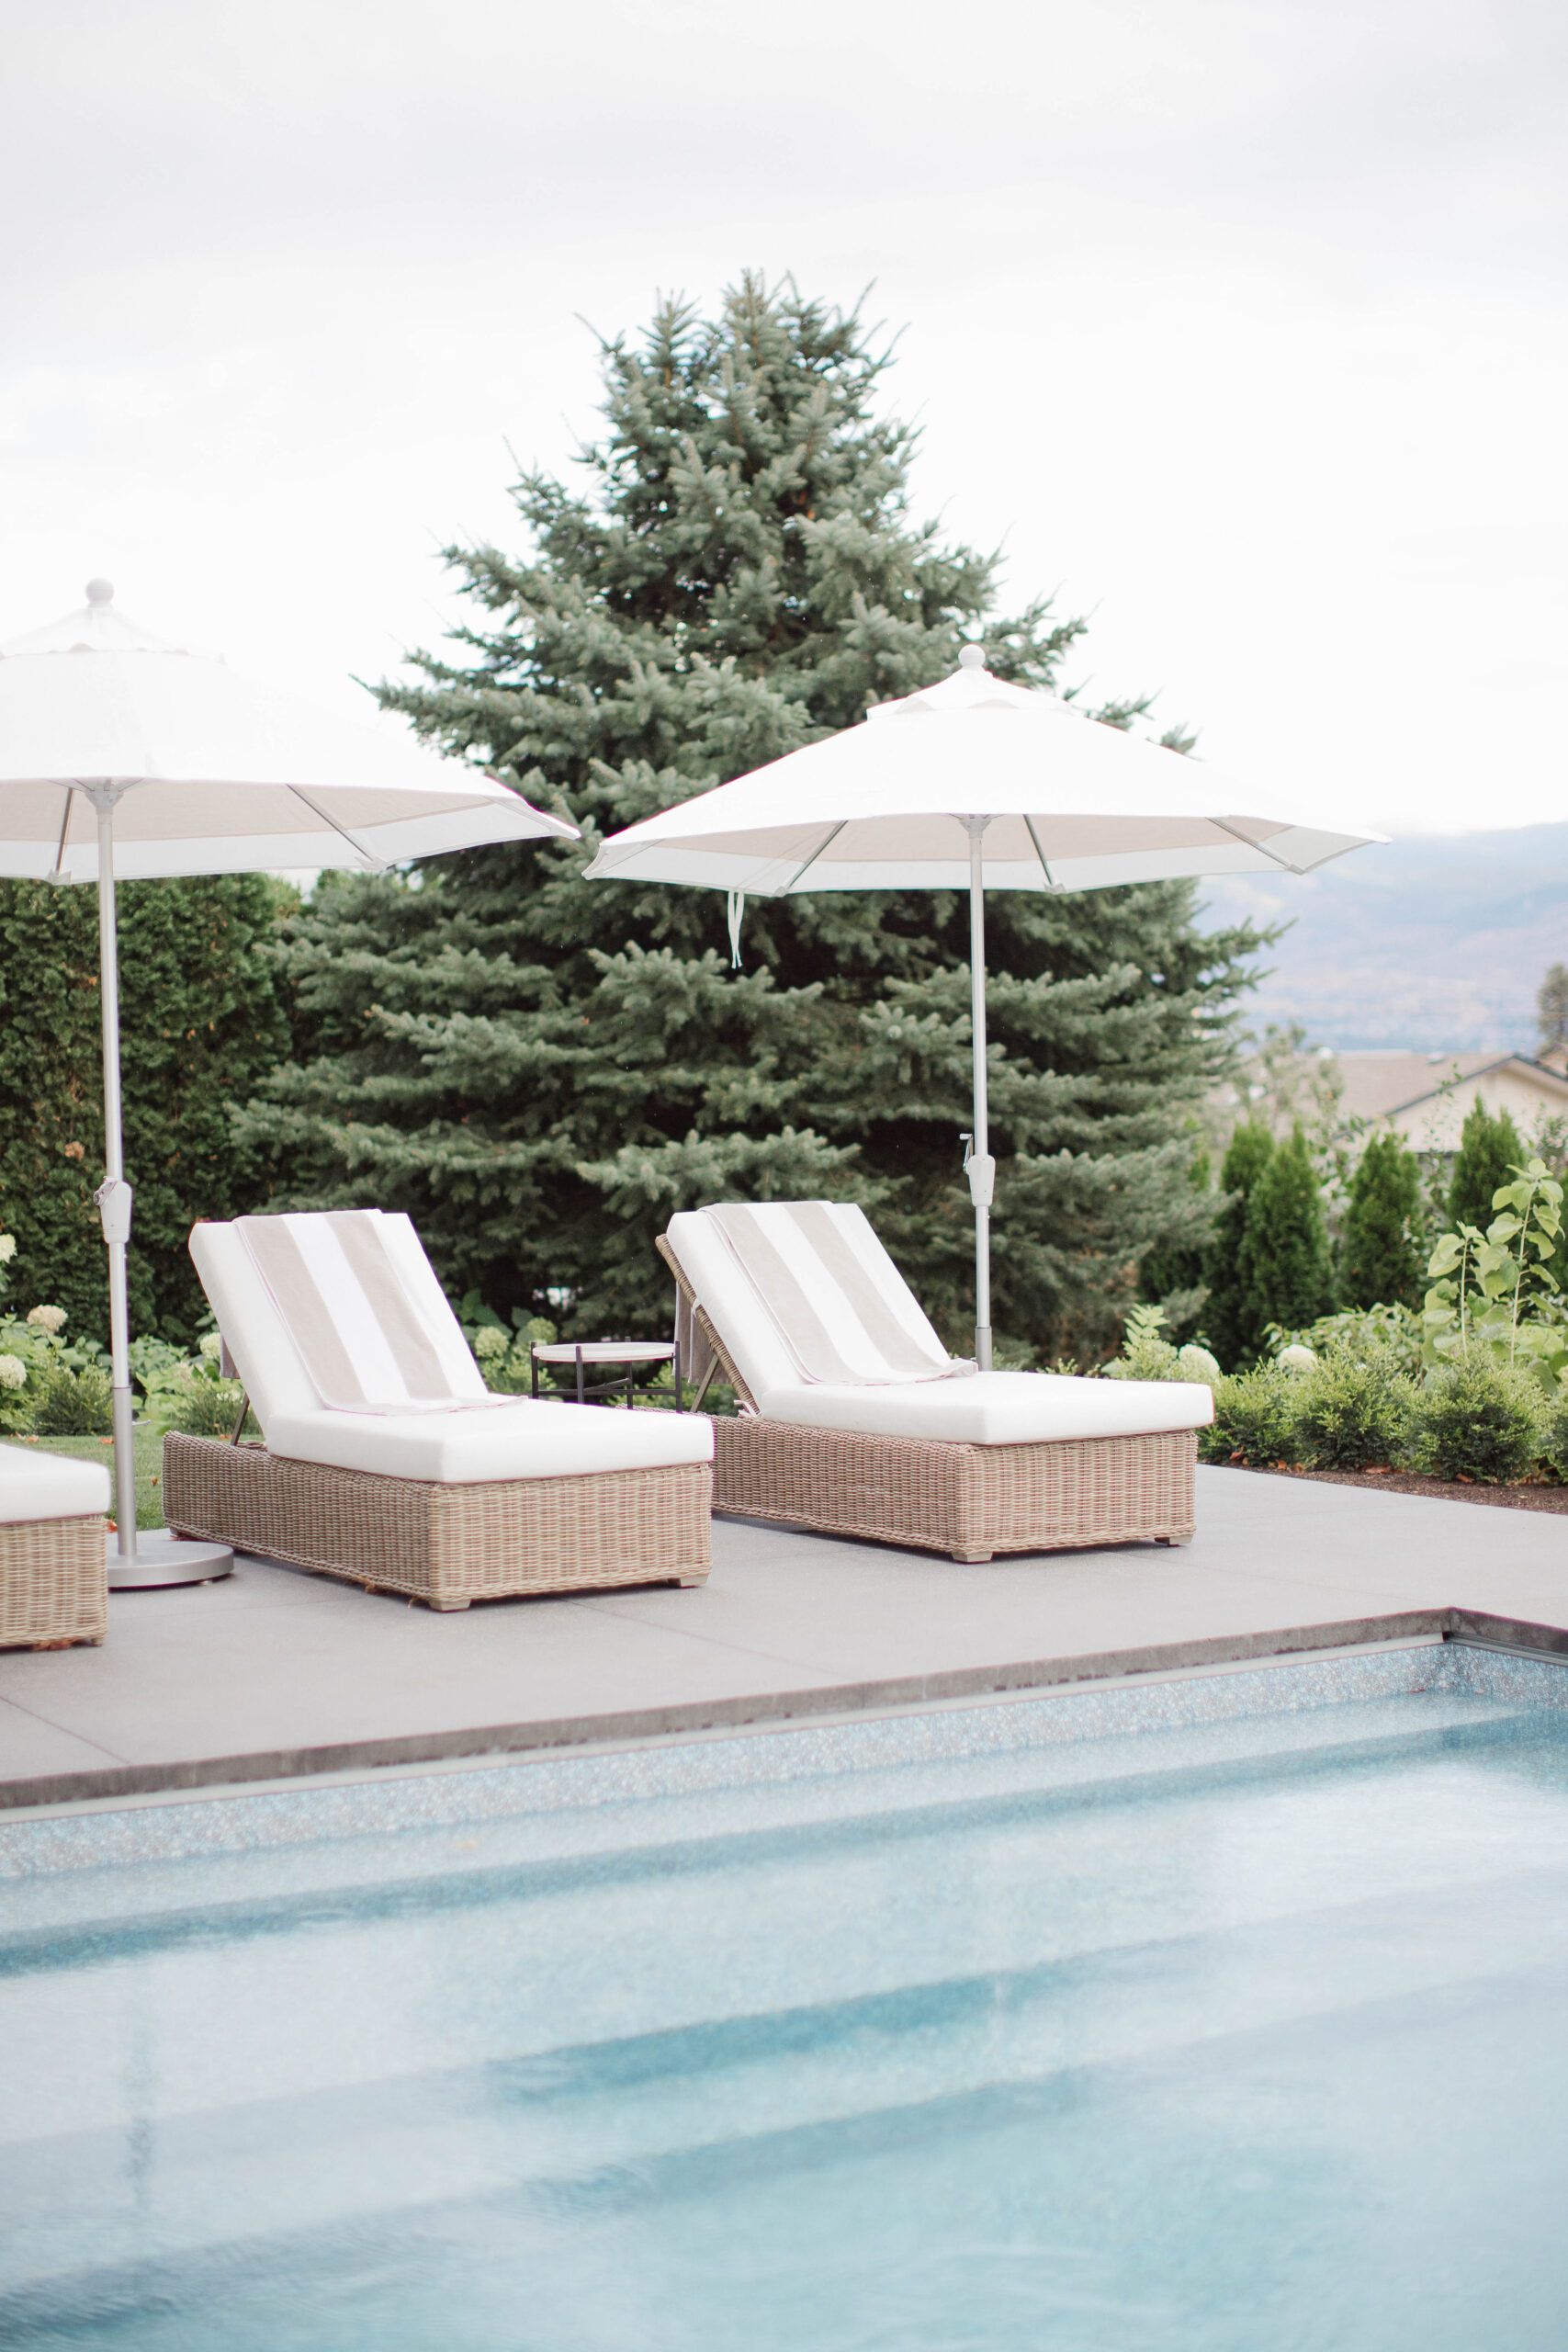 Pool Loungers with white umbrellas